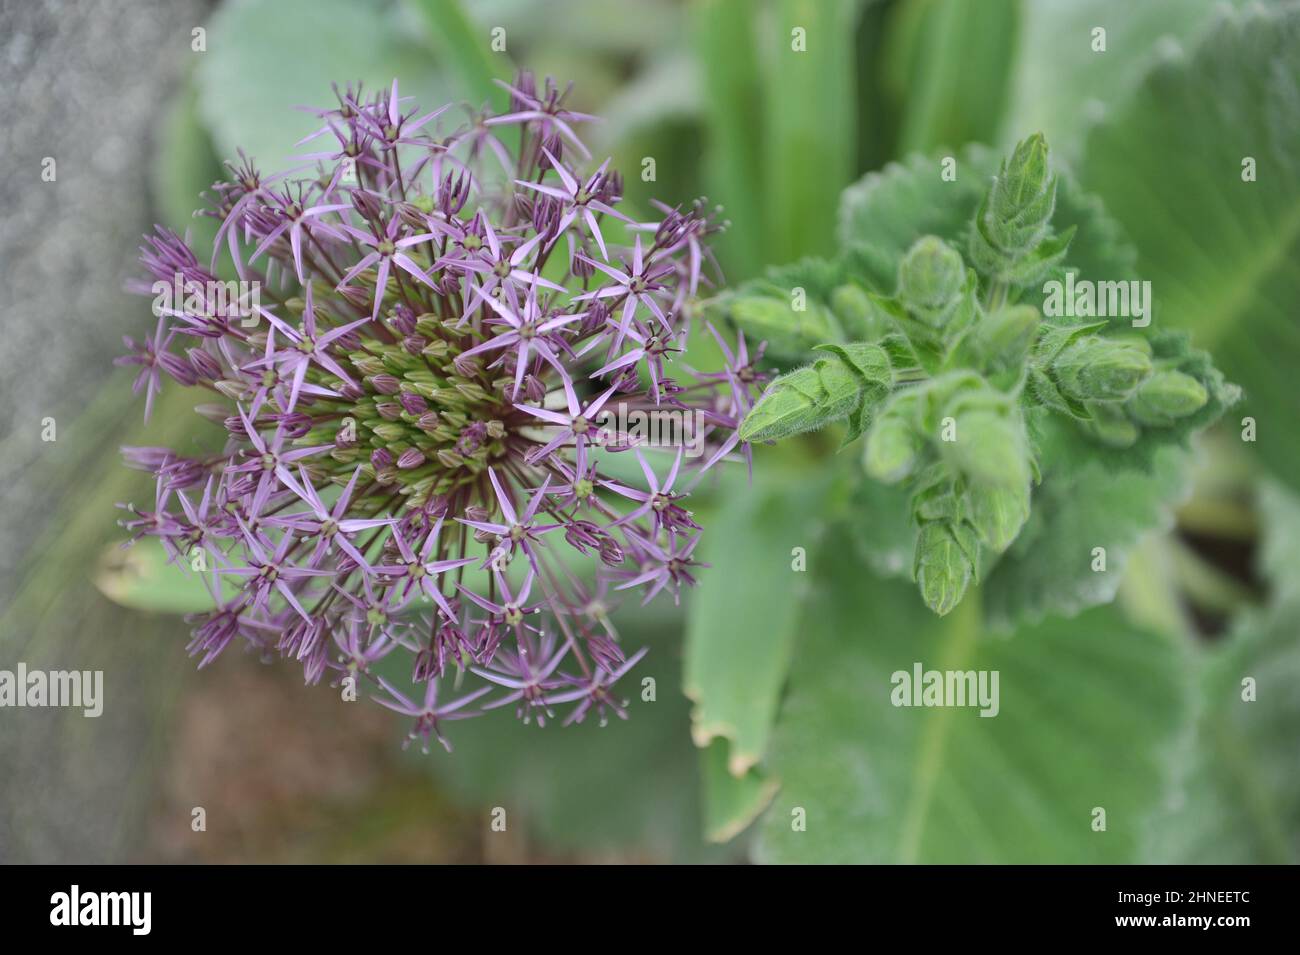 Persian onion or star of Persia (Allium cristophii) blooms in a garden im May Stock Photo